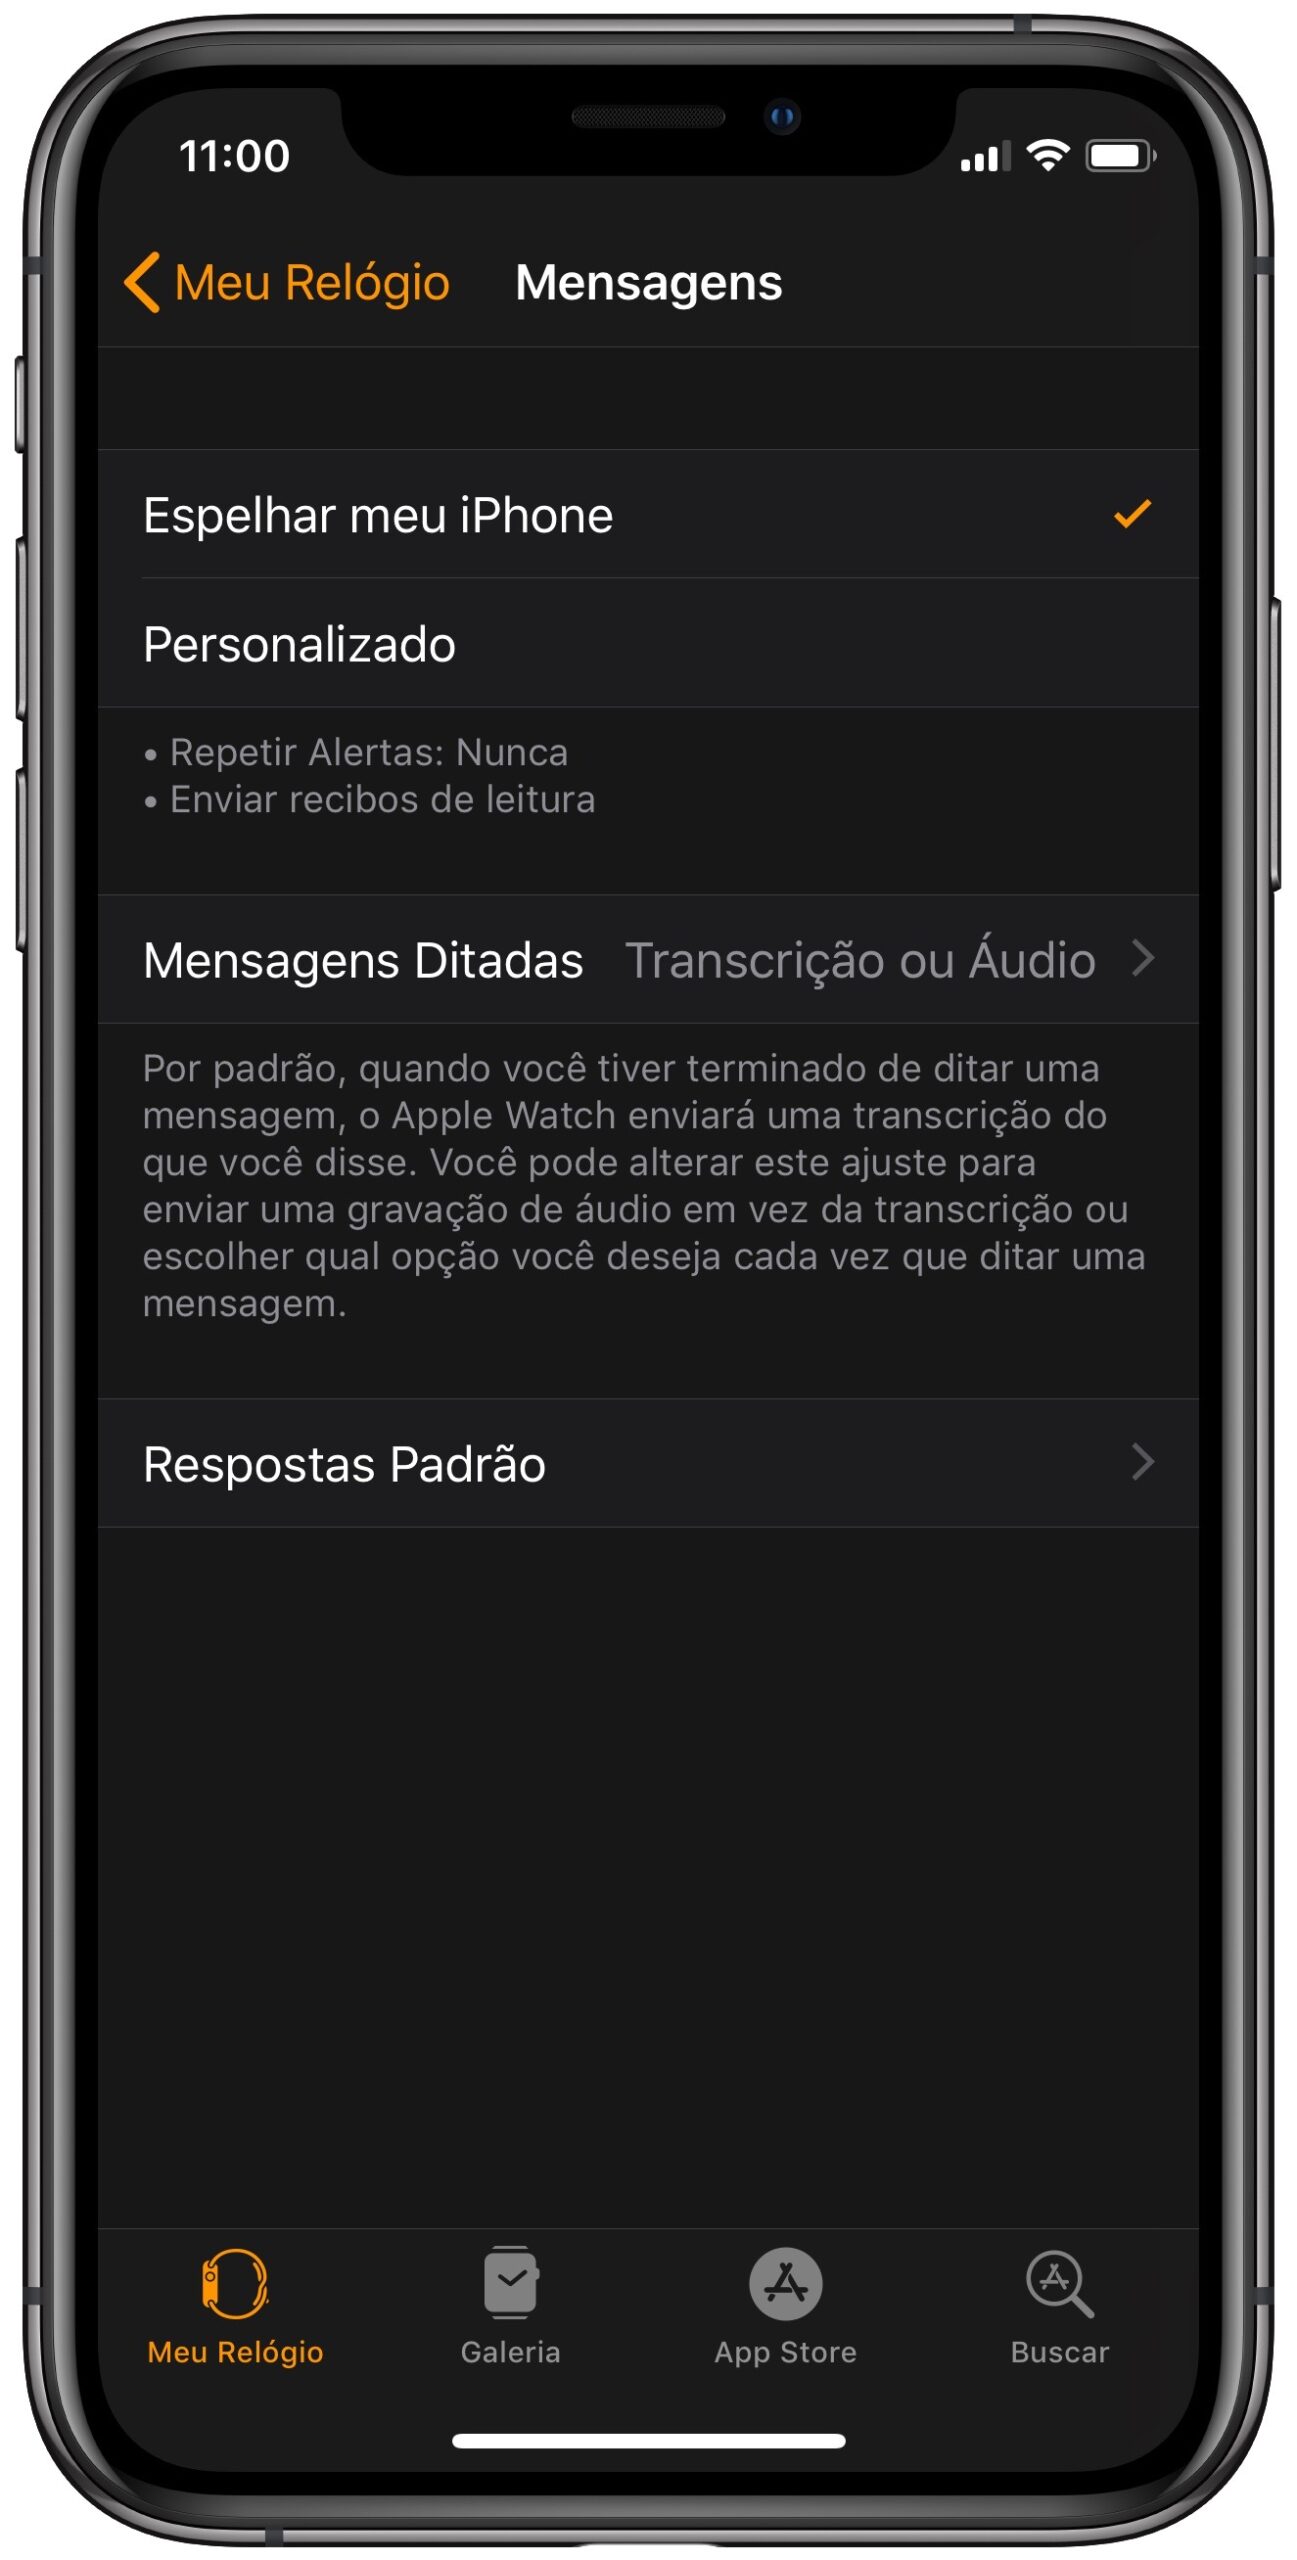 Learn how to customize Apple Watch predefined responses